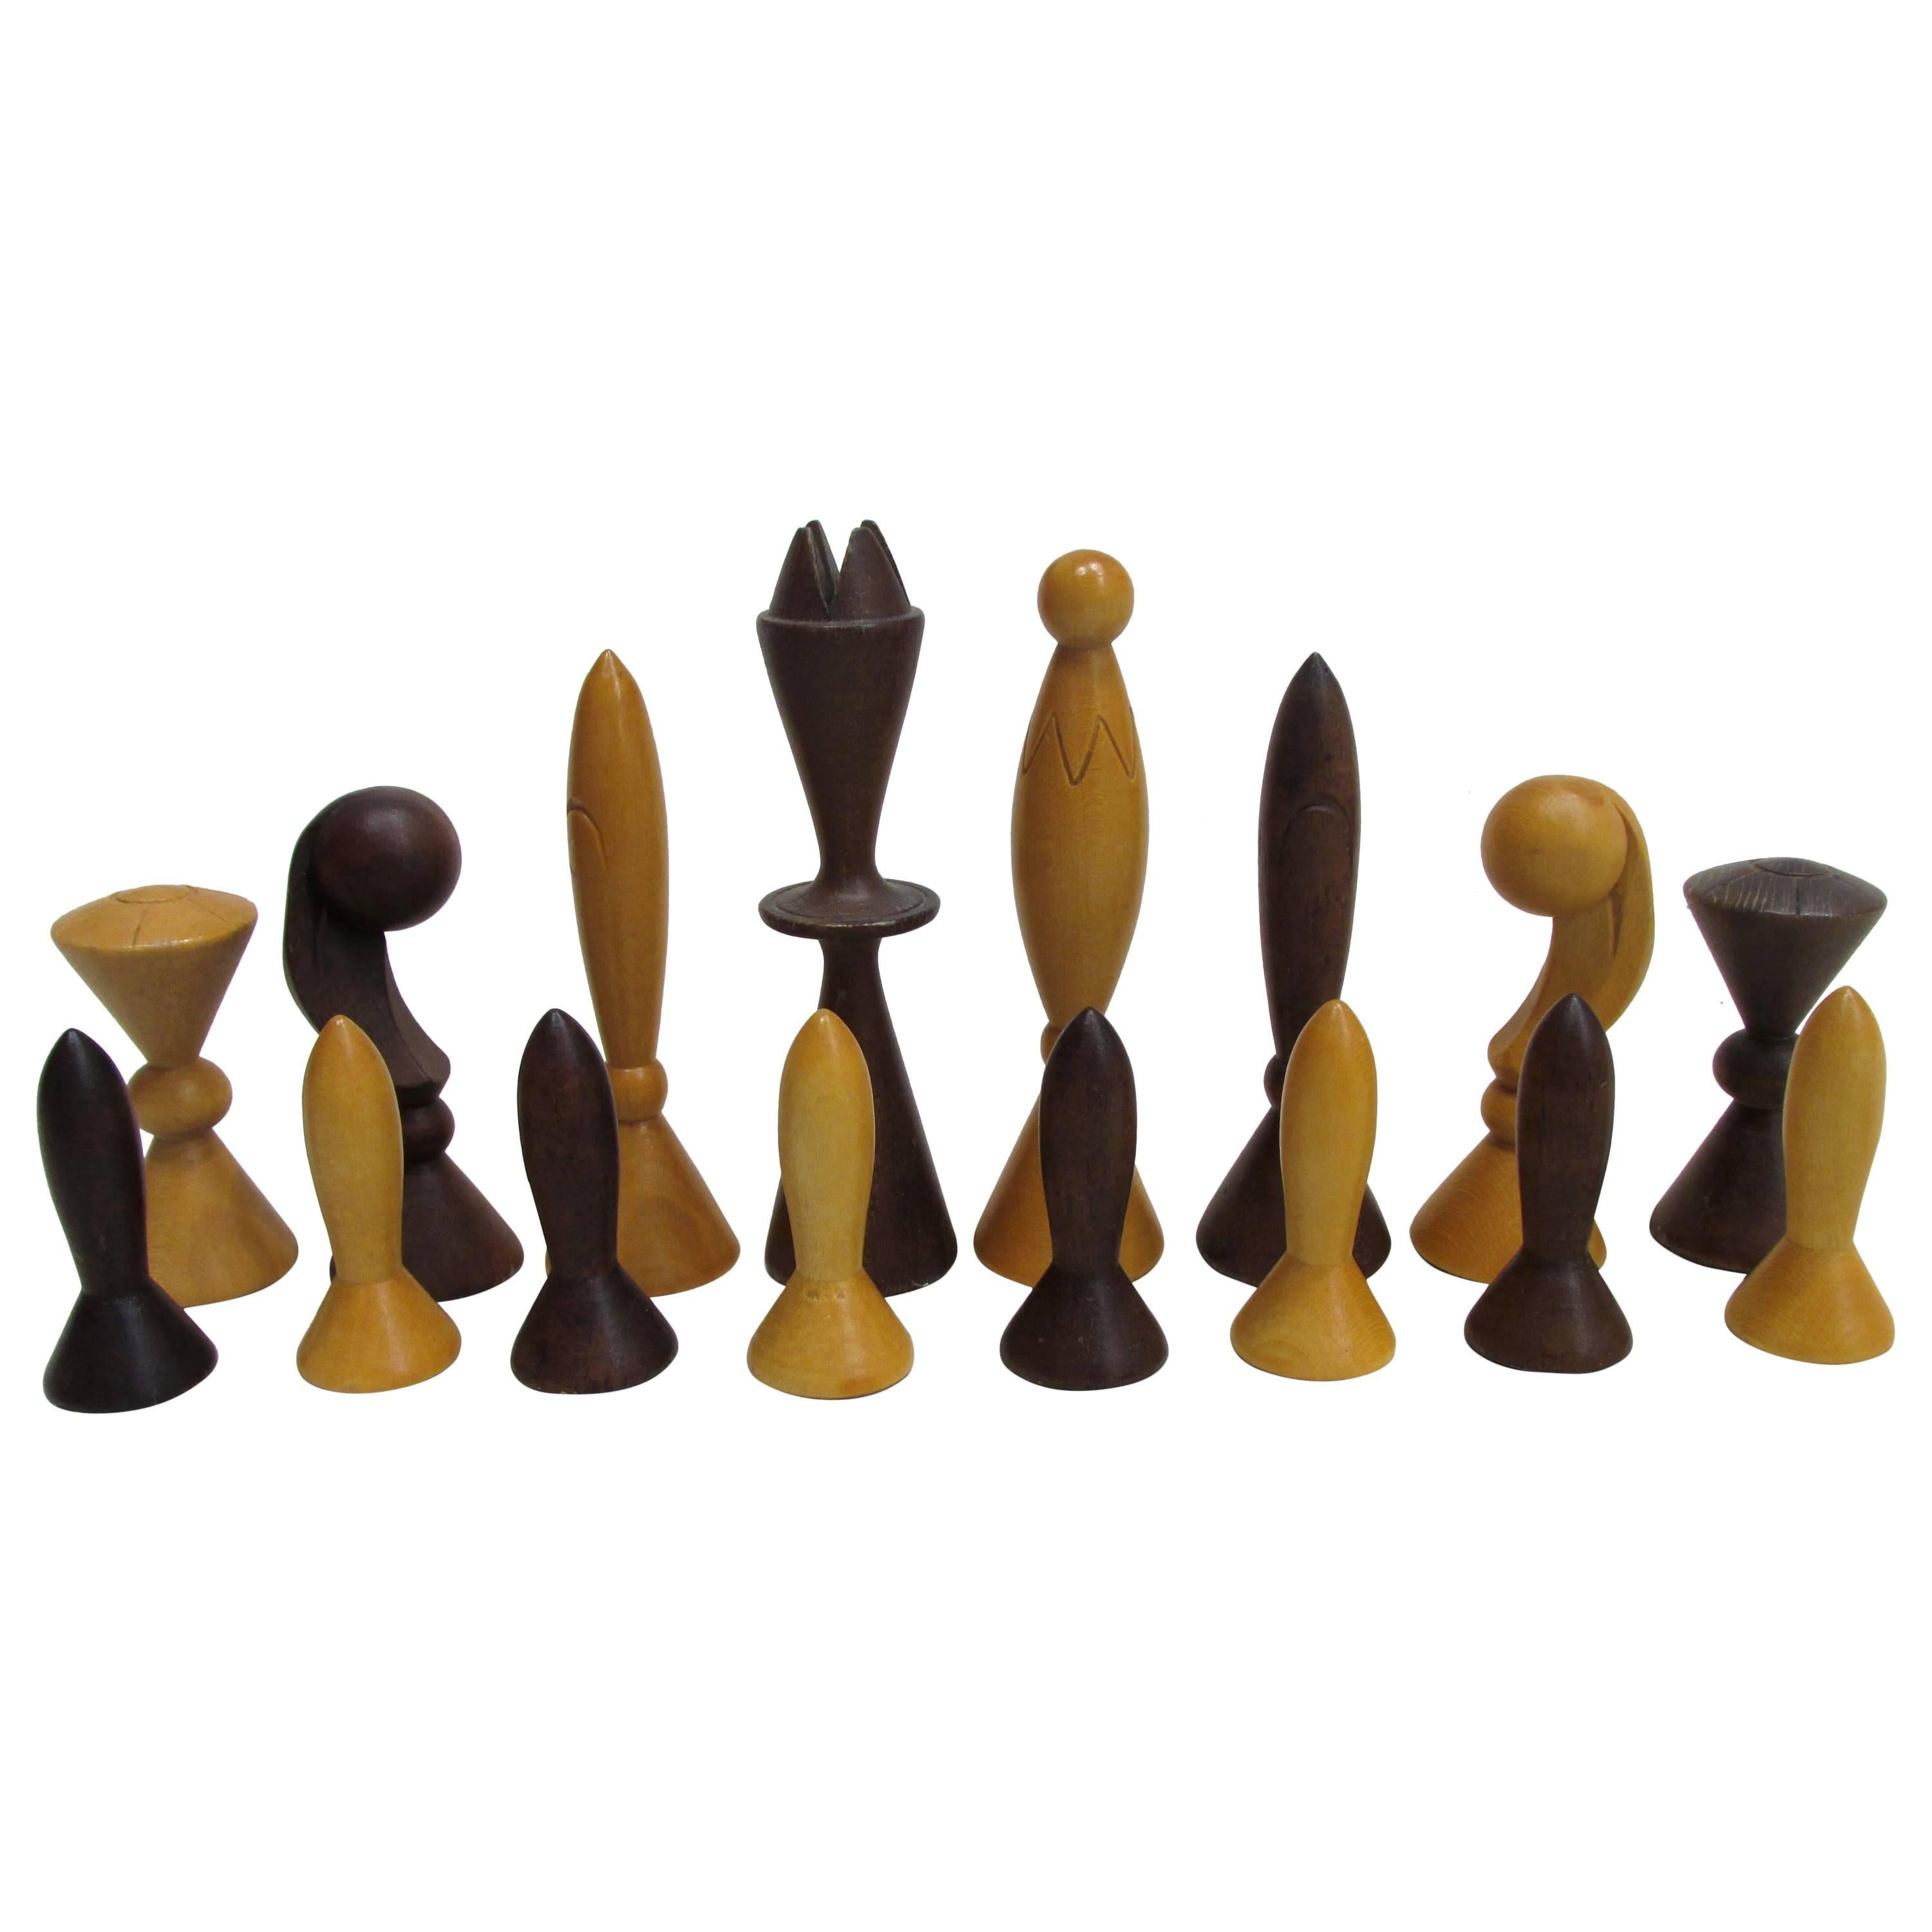 Space Age Chess Set by Anri